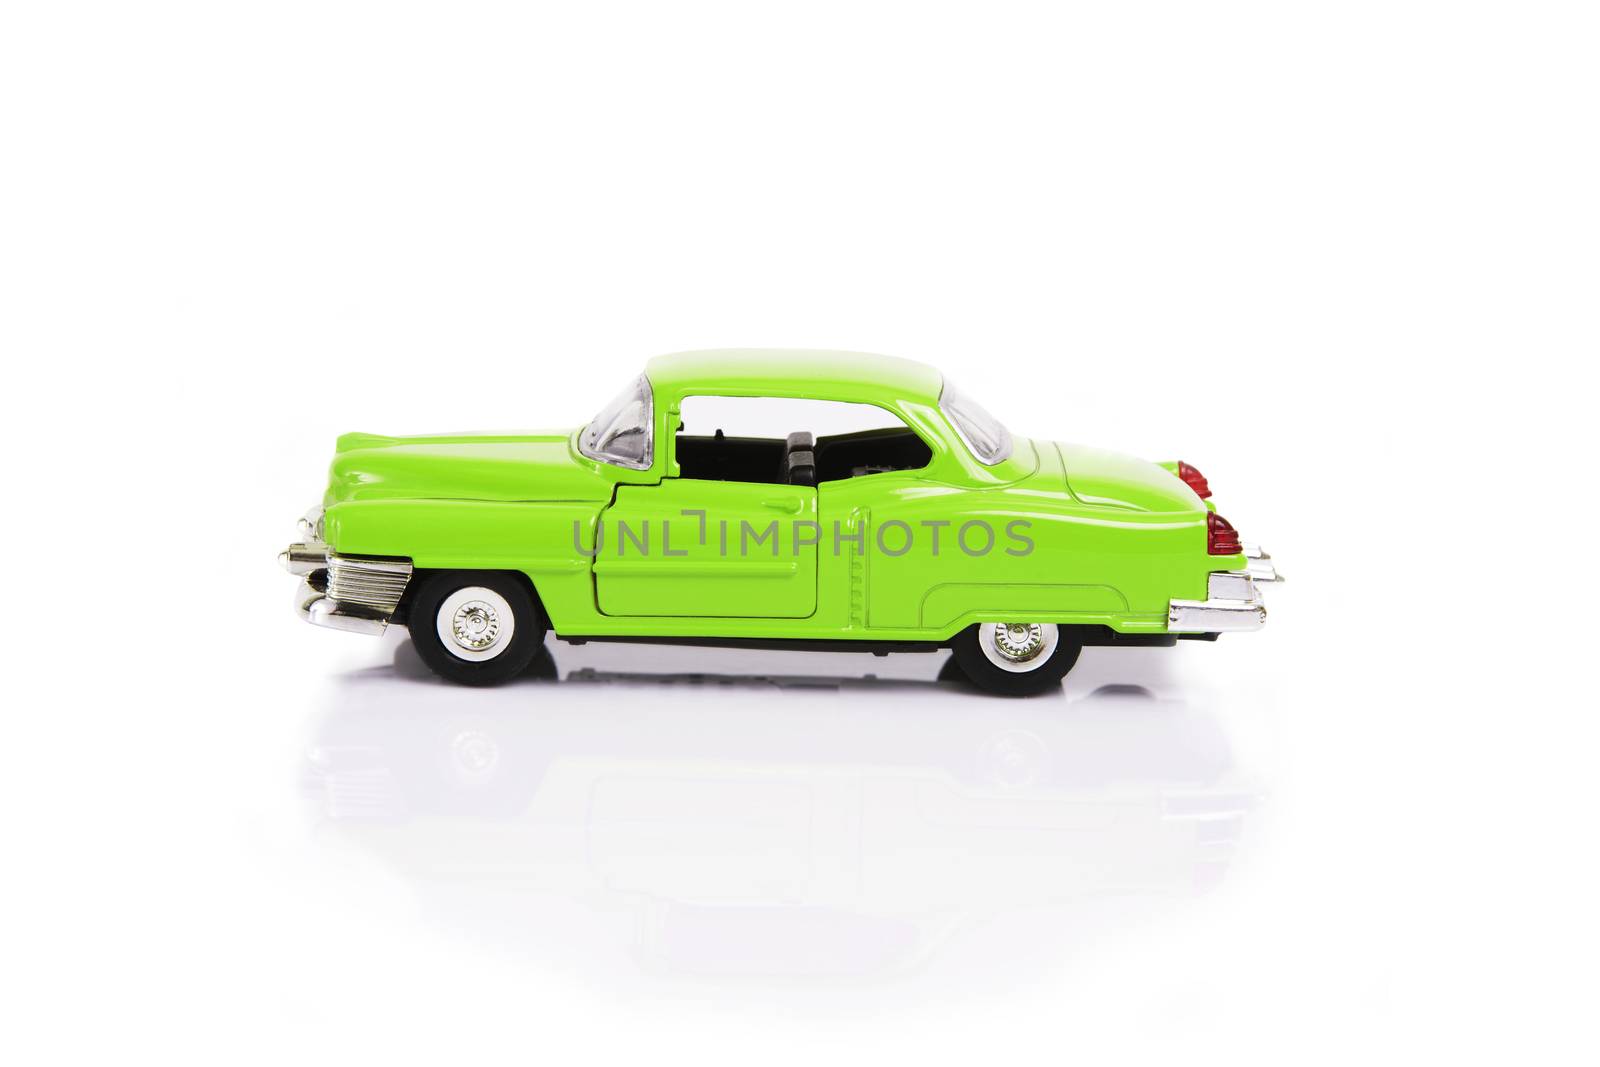 Side view of green model toy car in retro style on white background.